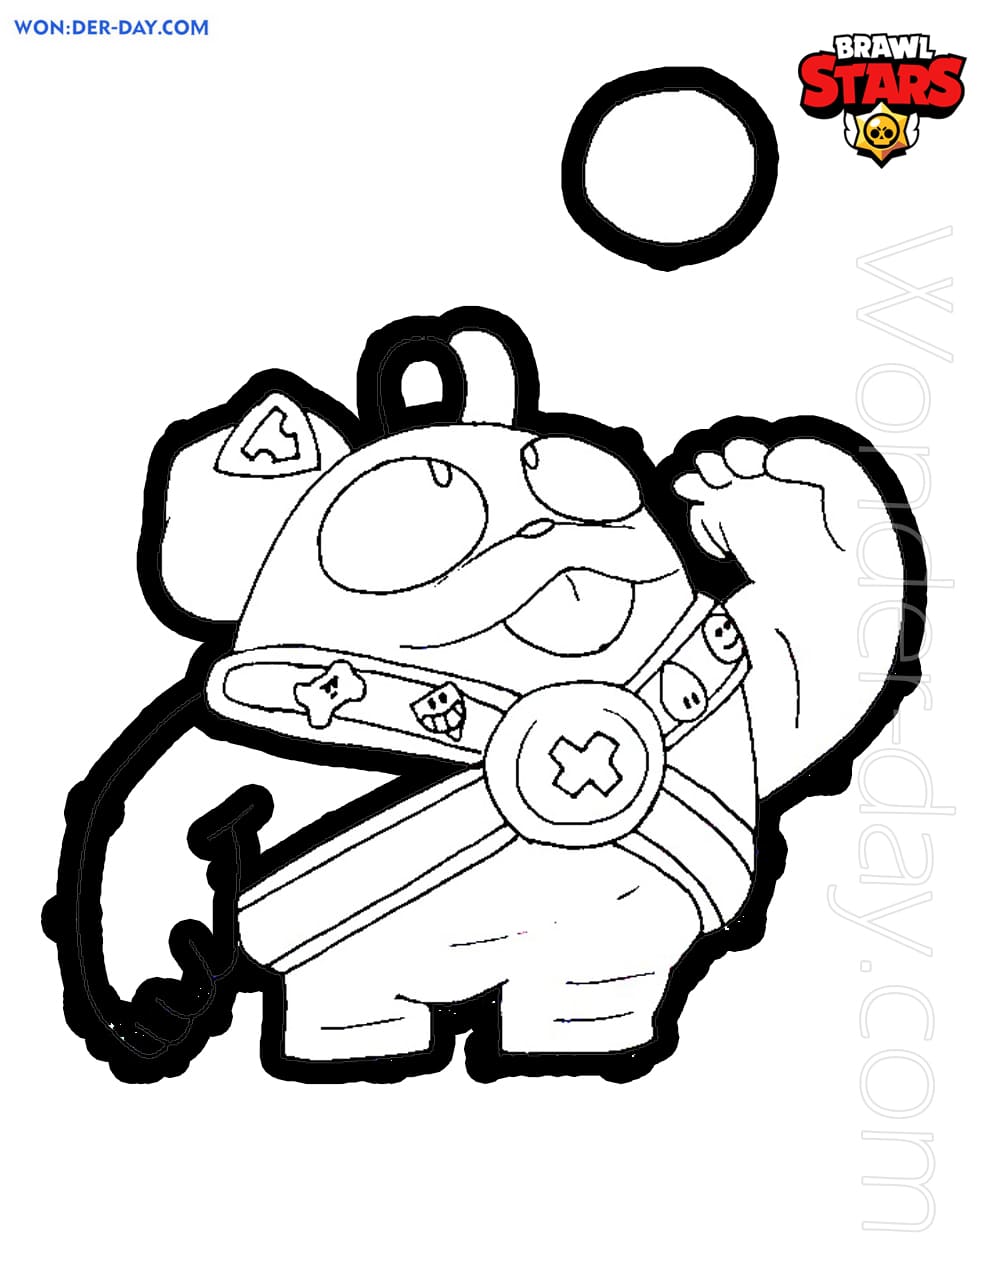 Squeak Brawl Stars Coloring Pages Wonder Day Coloring Pages For Children And Adults - coronel ruffs brawl stars para colorear